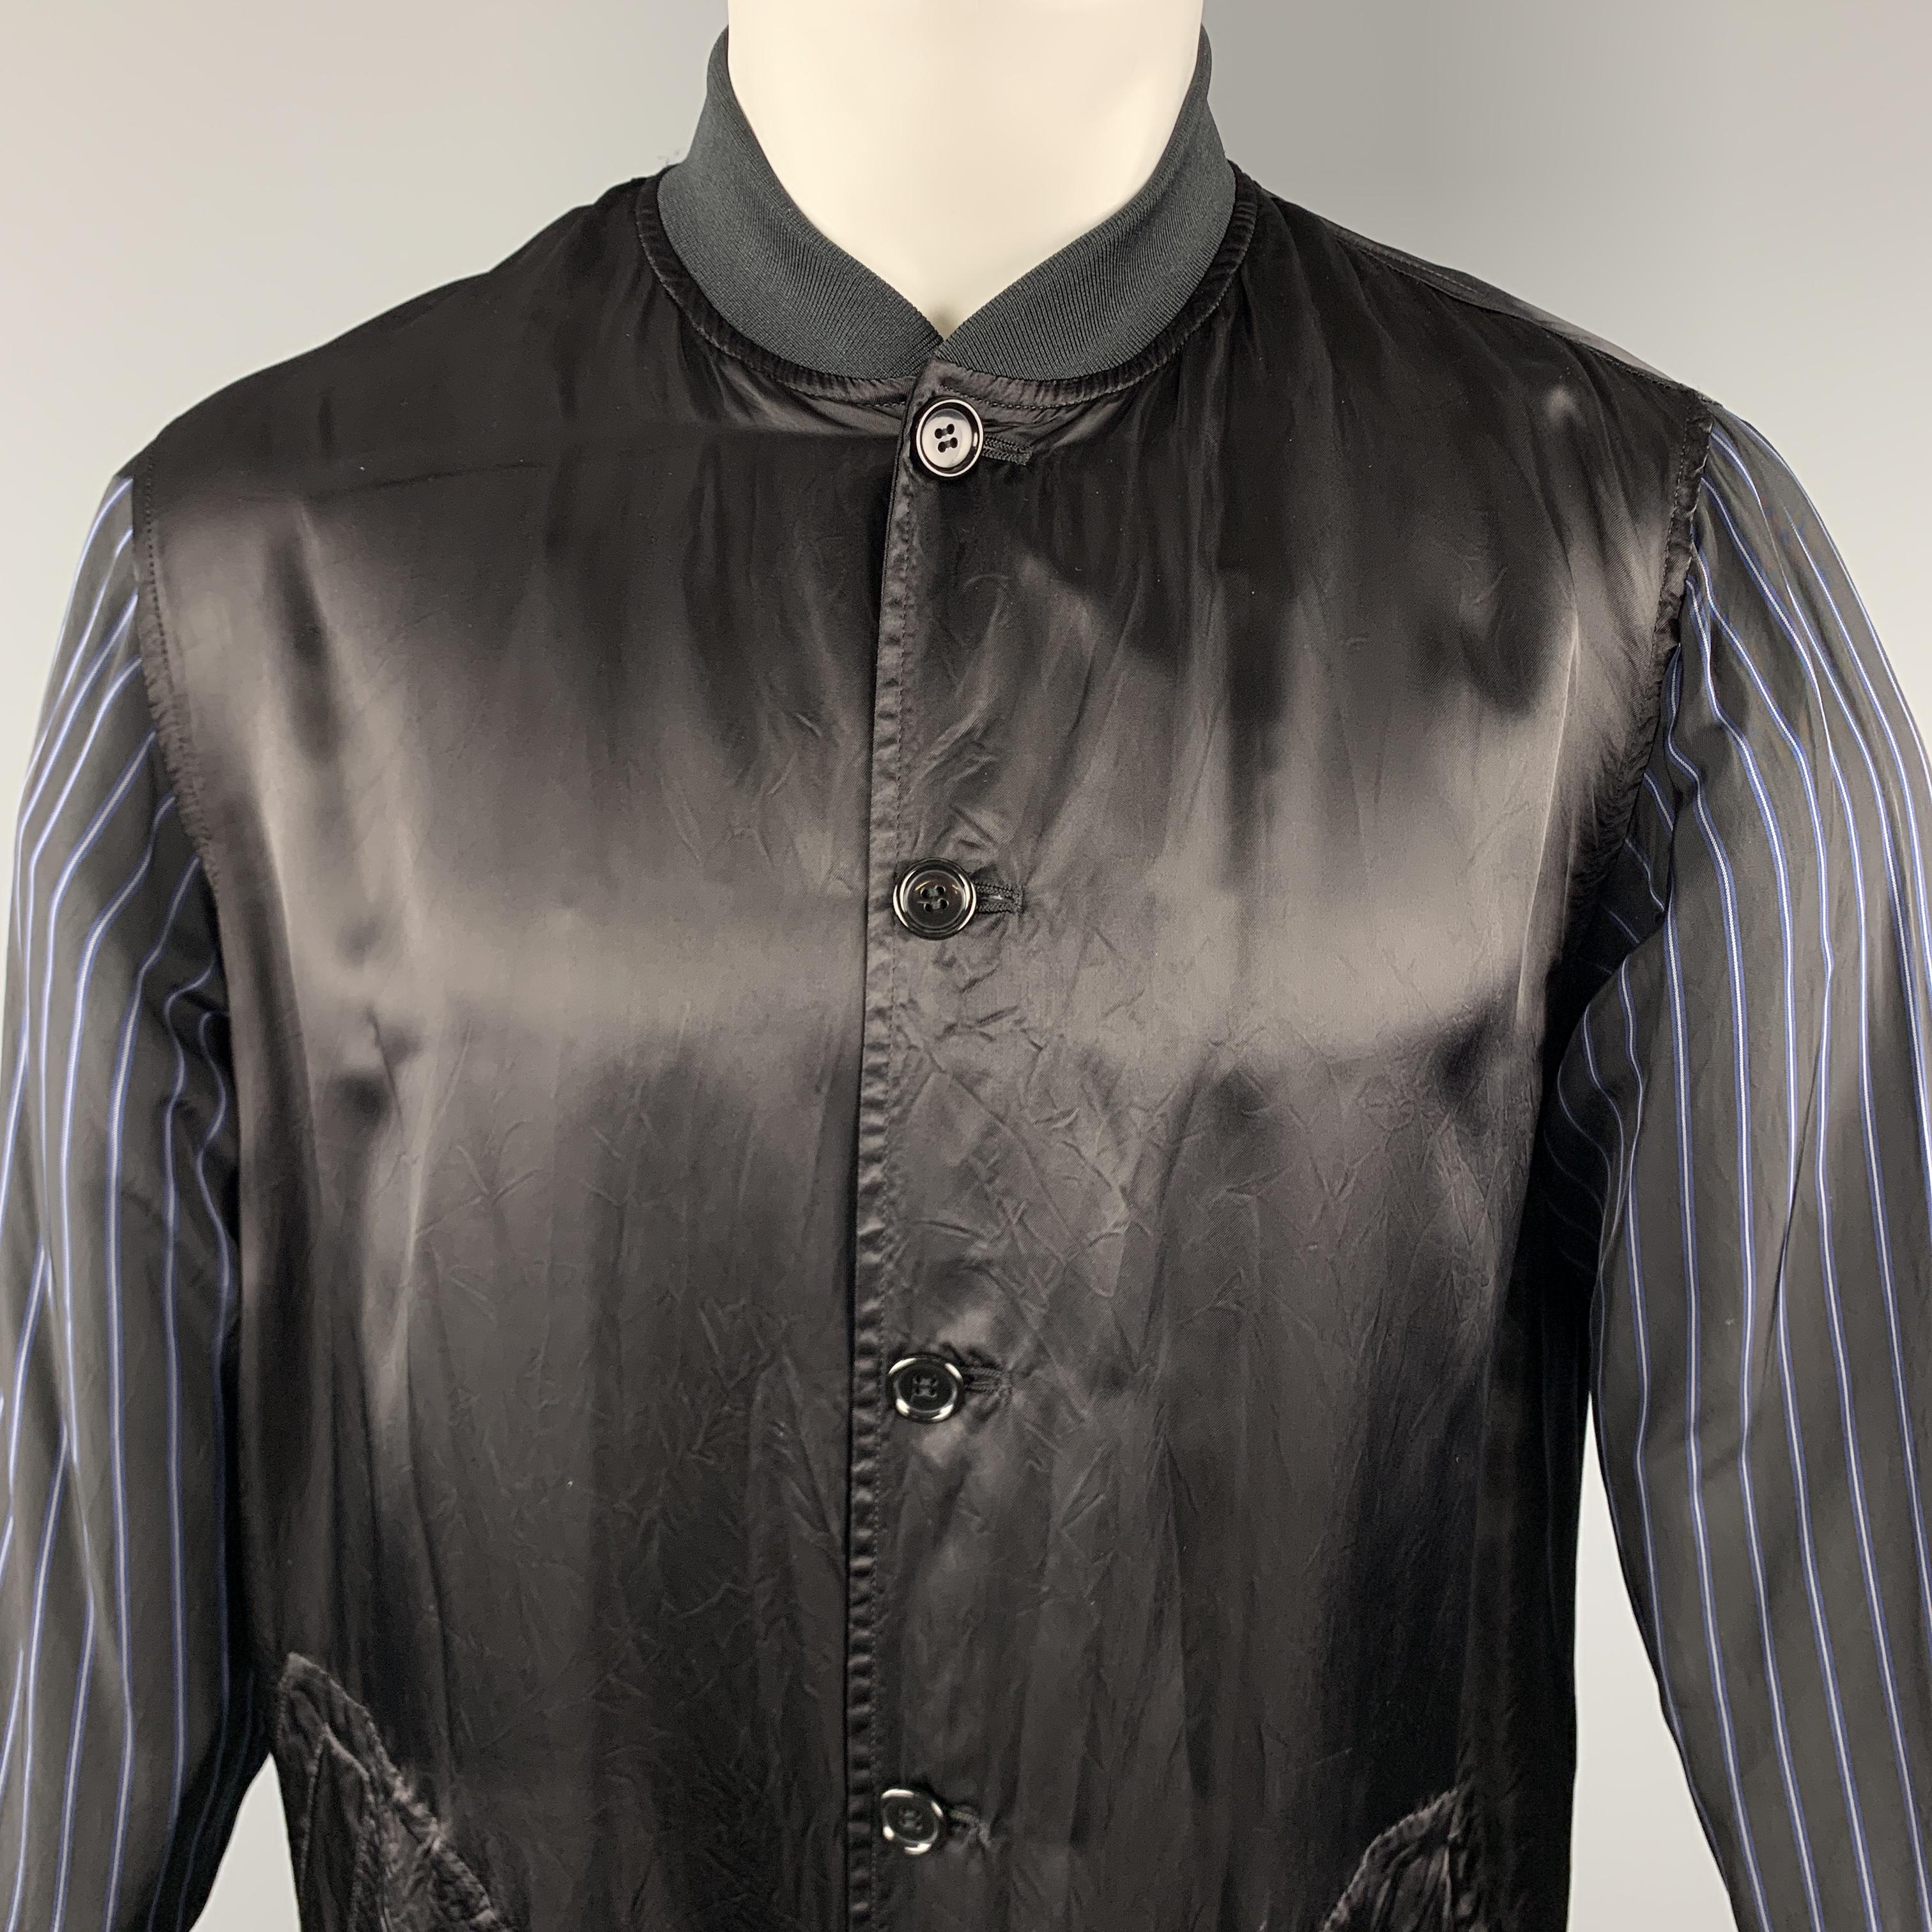 COMME des GARCONS GOOD DESIGN SHOP Re-Edition 1986 Staff Coat comes in a black solid and striped mixed fabrics, with a buttoned front, six buttons at closure, patch pockets, striped sleeves, a 